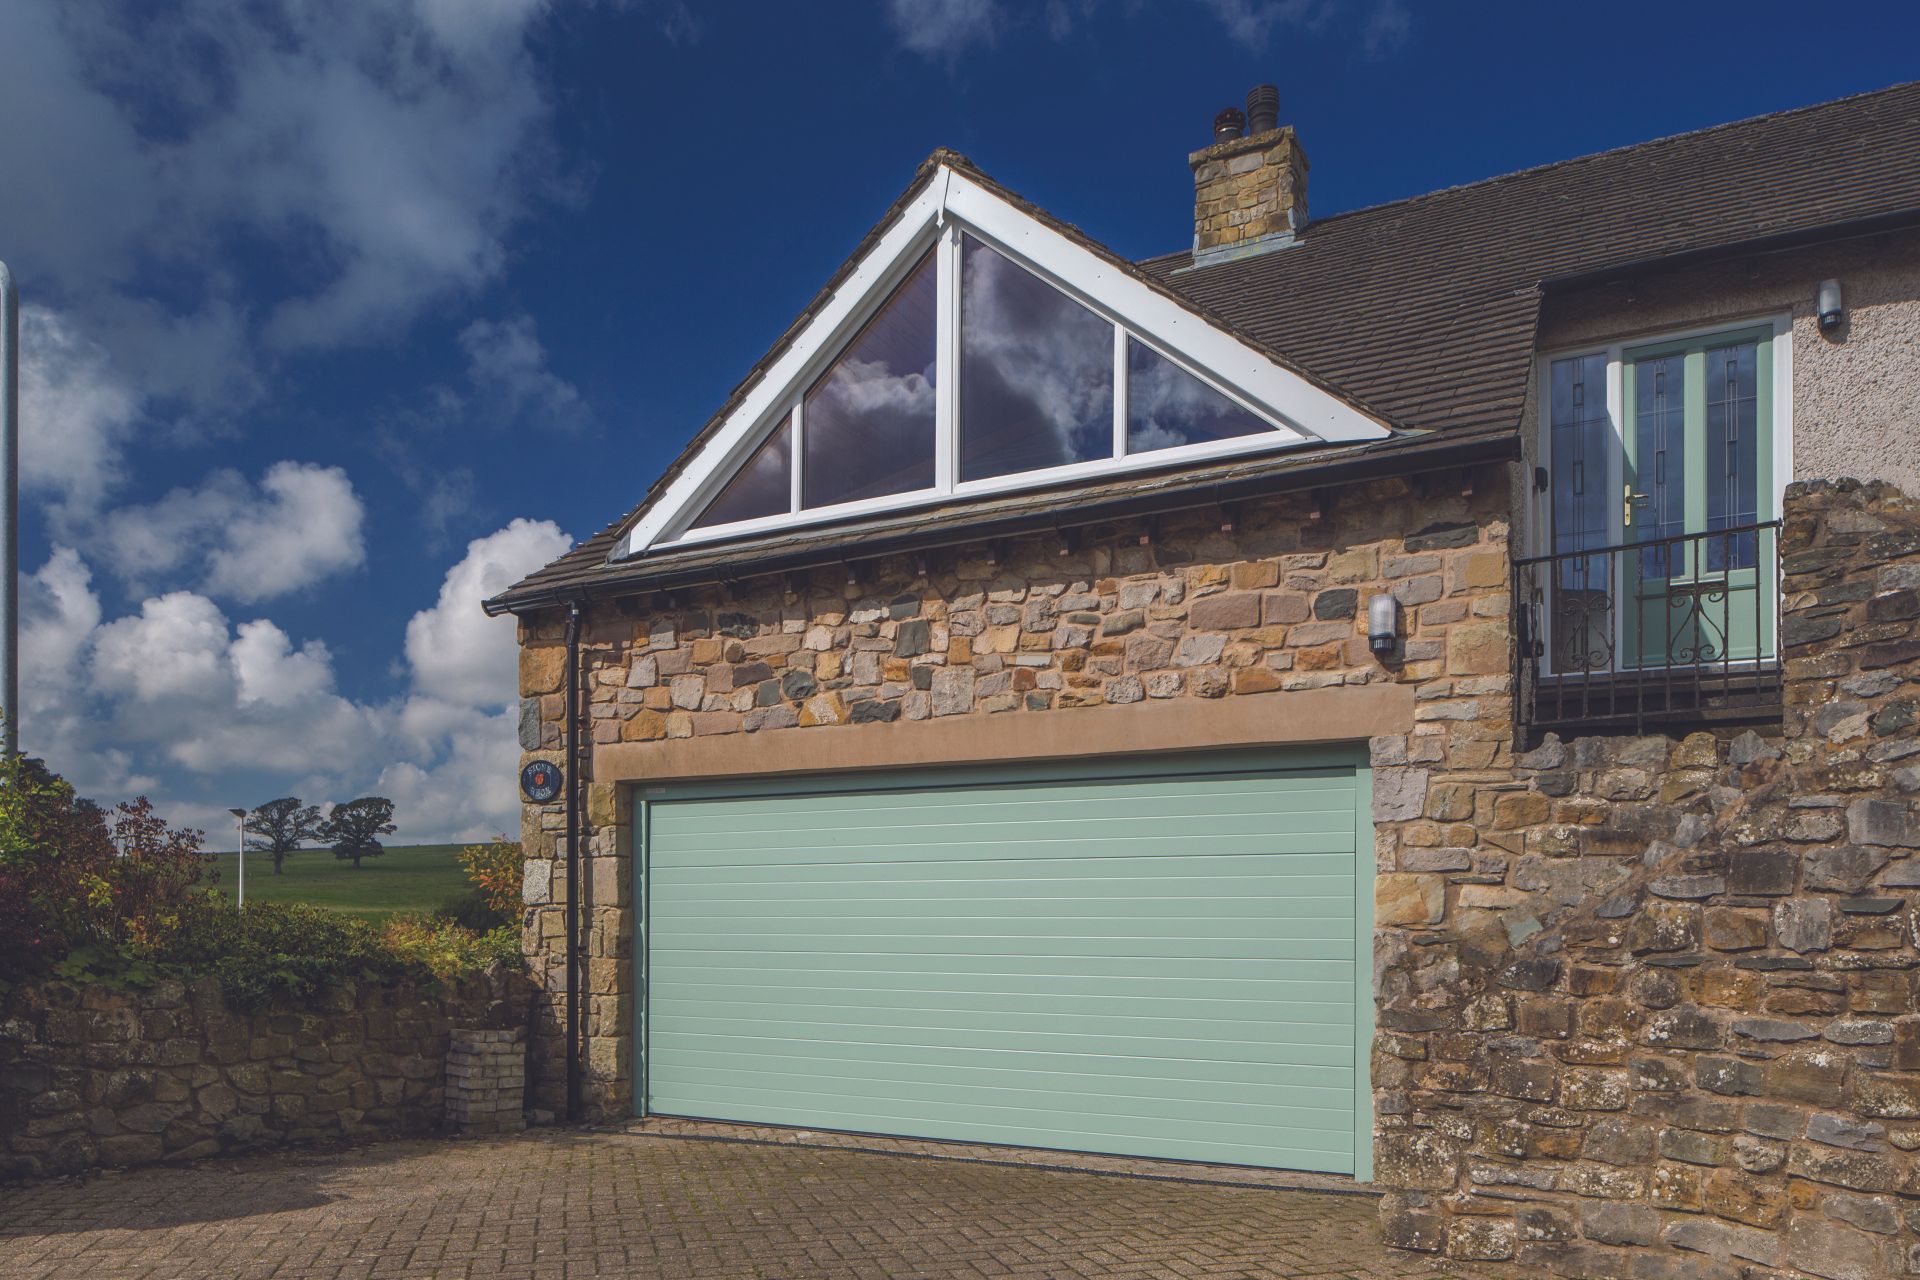 A newly fitted green garage door on a farmhouse